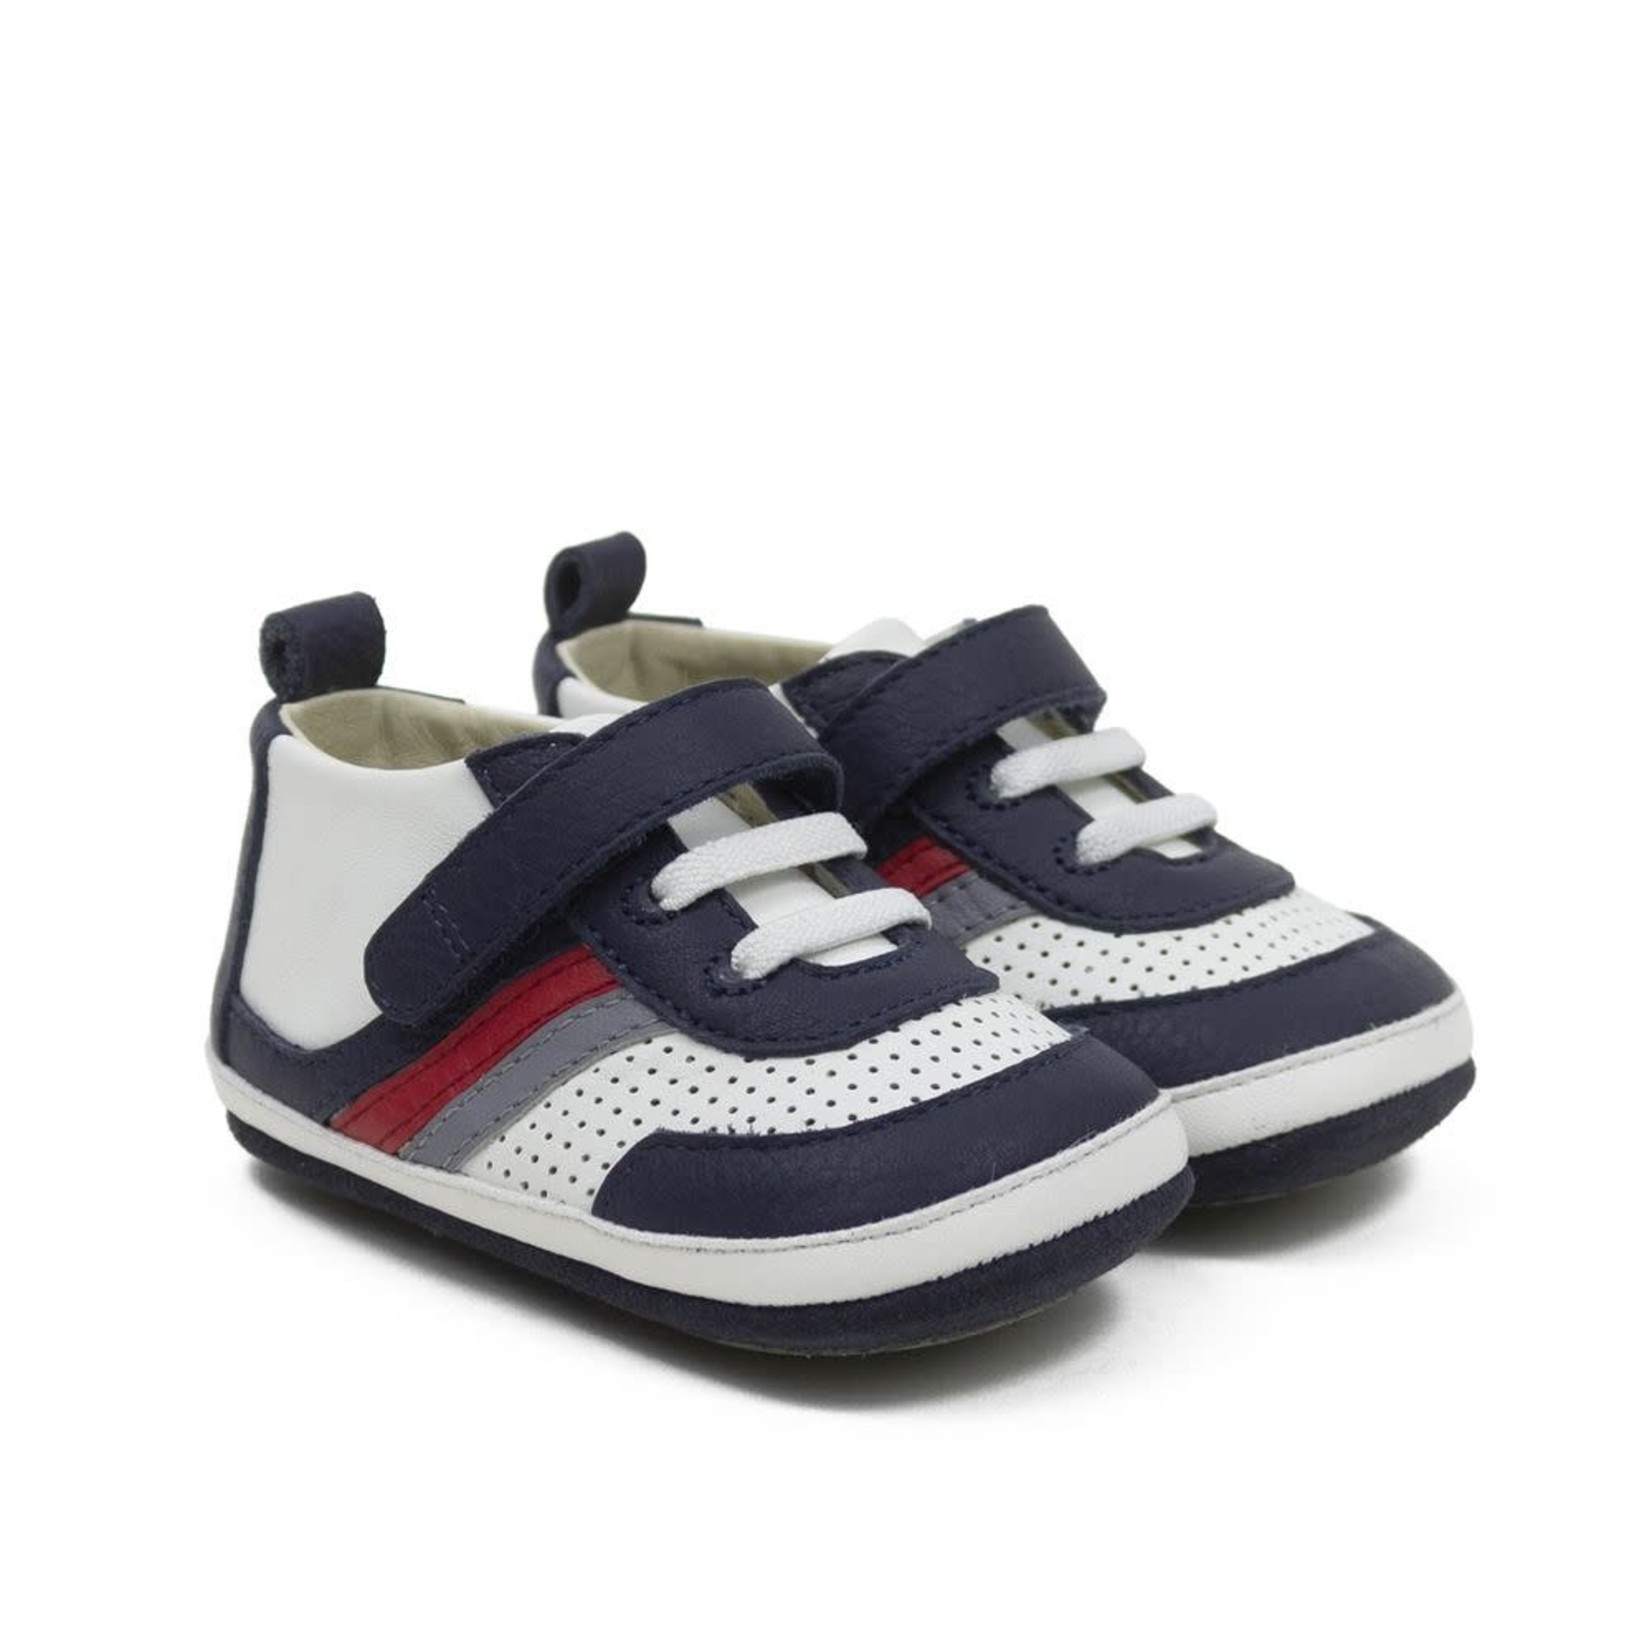 Robeez ROBEEZ - Transition shoes 'First Kicks - Everyday Ethan' - Navy